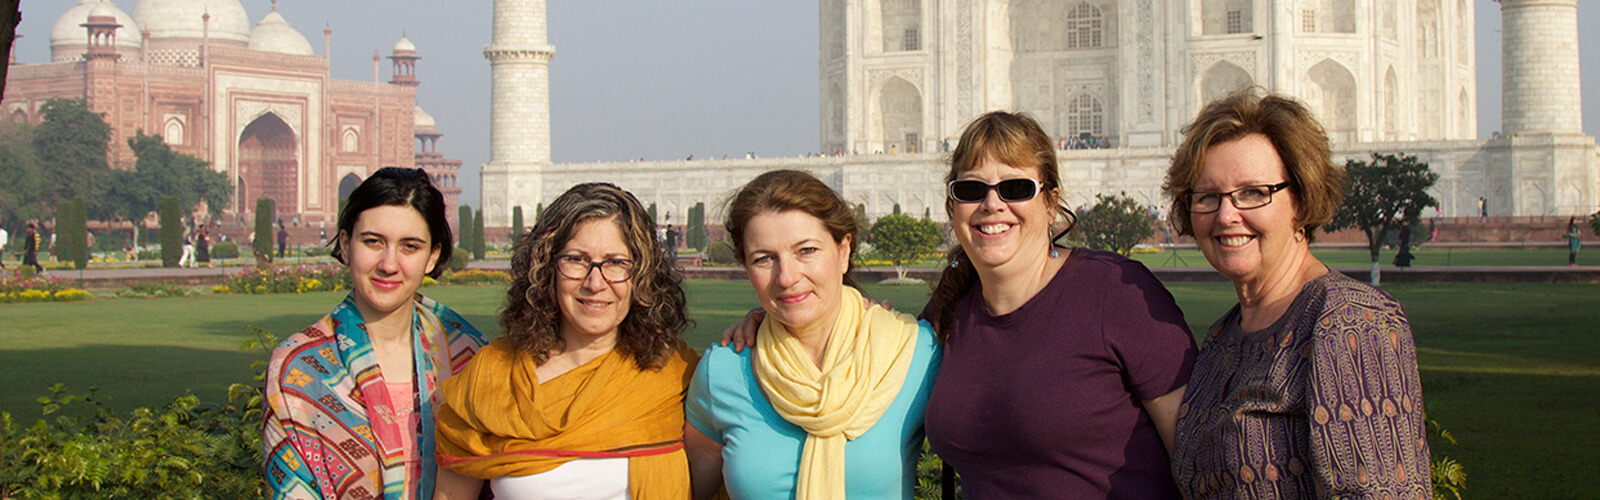 Carol Ketelson of Delectable Destinations with a group at the Taj Mahal in Agra India Carol Ketelson Delectable Destinations Culinary Tours